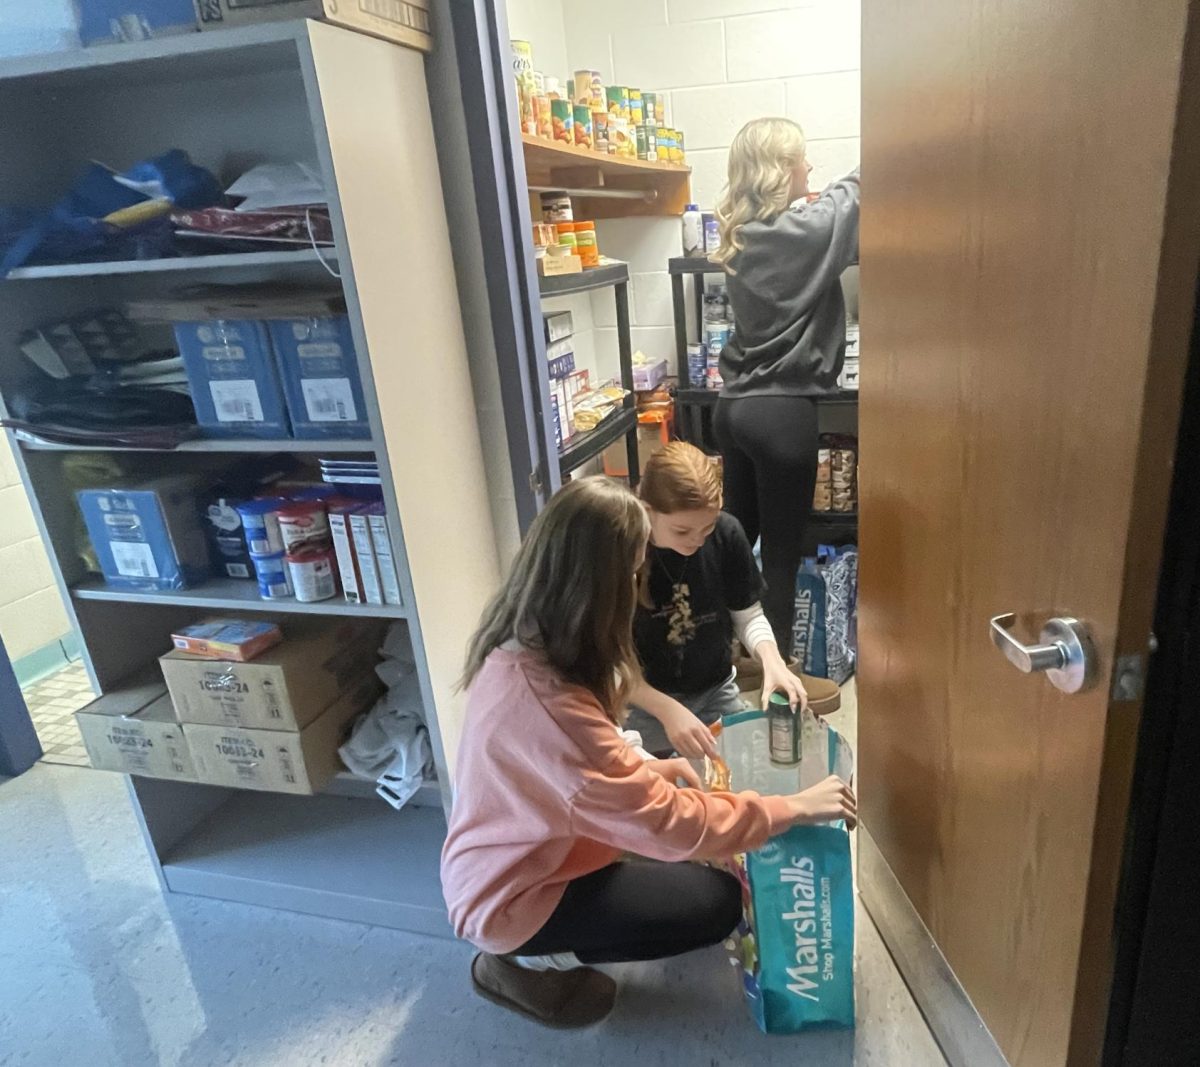 The+food+pantry%2C+located+in+room+209%2C+is+available+for+donations+and+pickups+at+any+time+during+the+school+year.+Students+may+talk+to+teachers+or+guidance+counselors+if+they+are+interested+in+receiving+a+donation+of+supplies+or+submit+an+anonymous+request+for+a+pickup+through+Google+Forms.